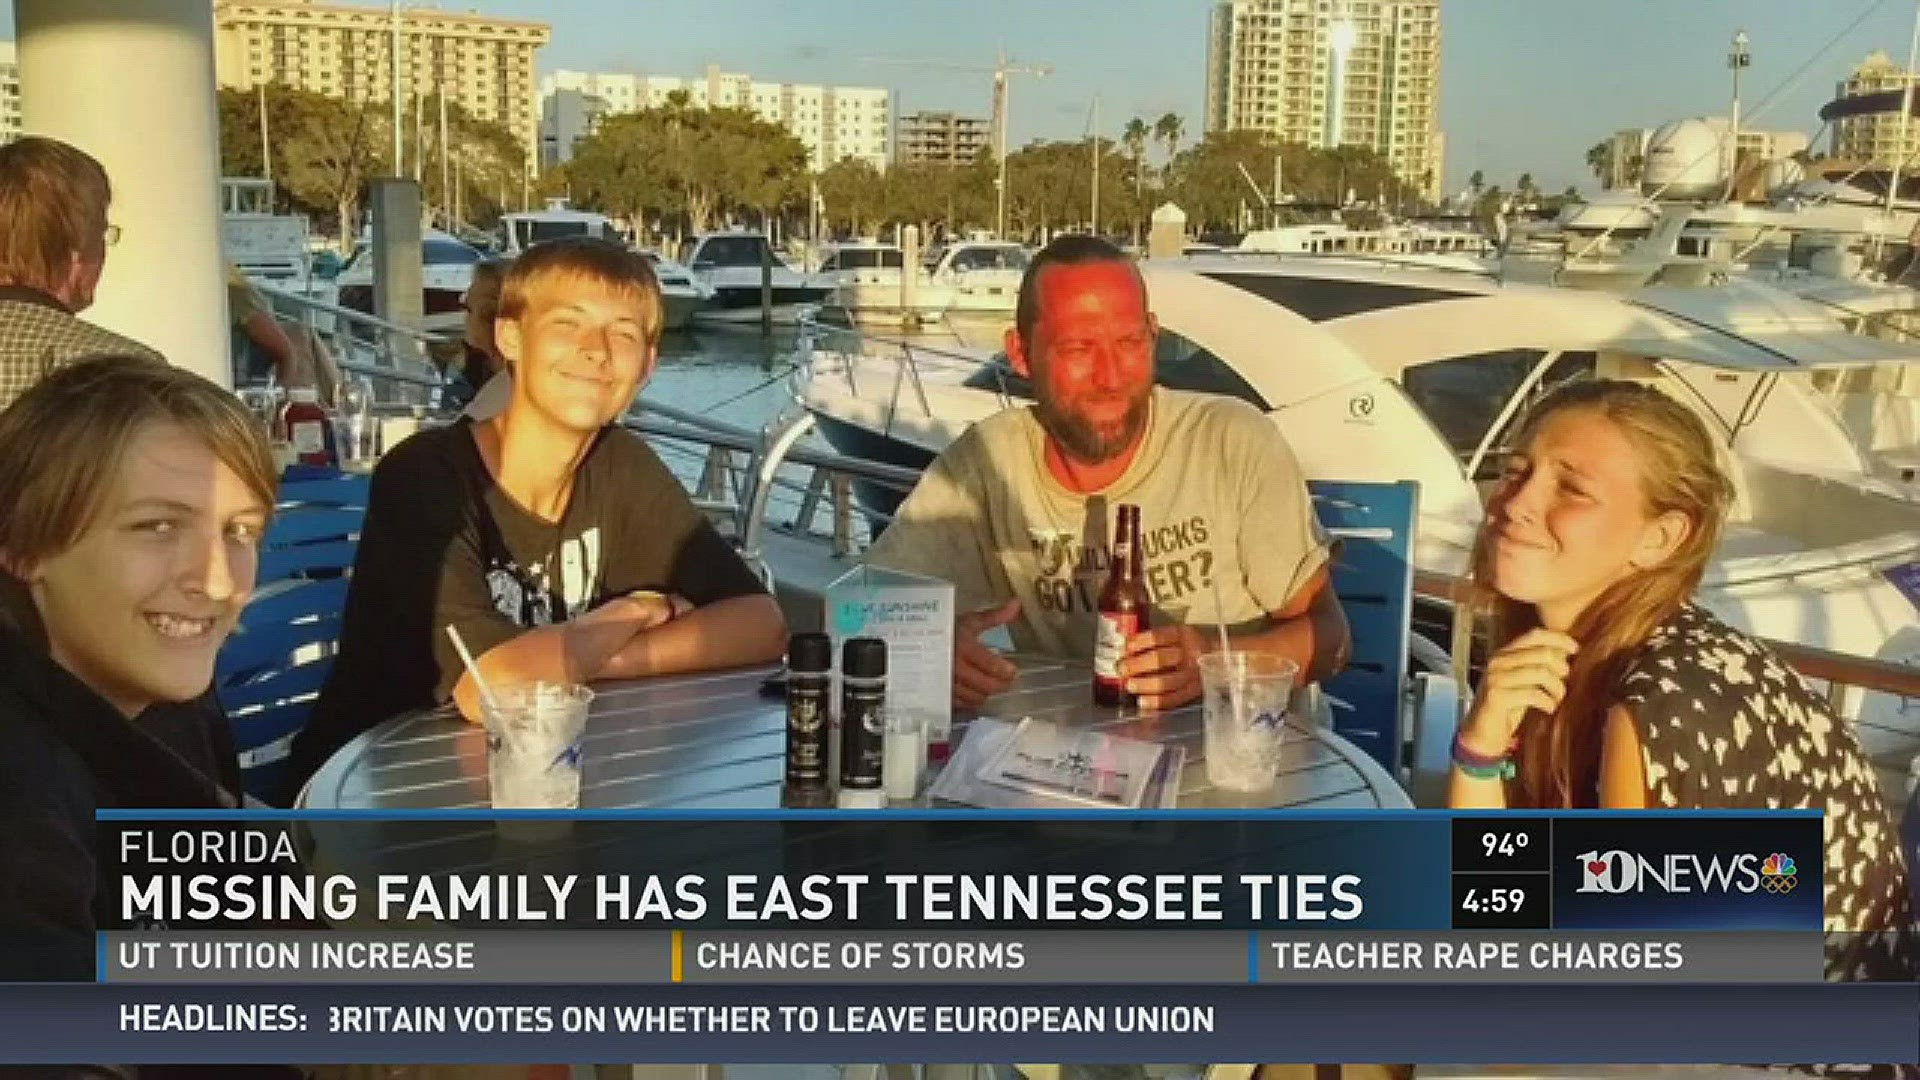 The search continues, but the outlook looks grim for a Sarasota family with East Tennessee ties whose sailboat disappeared off the southwest coast of Florida this past Sunday.